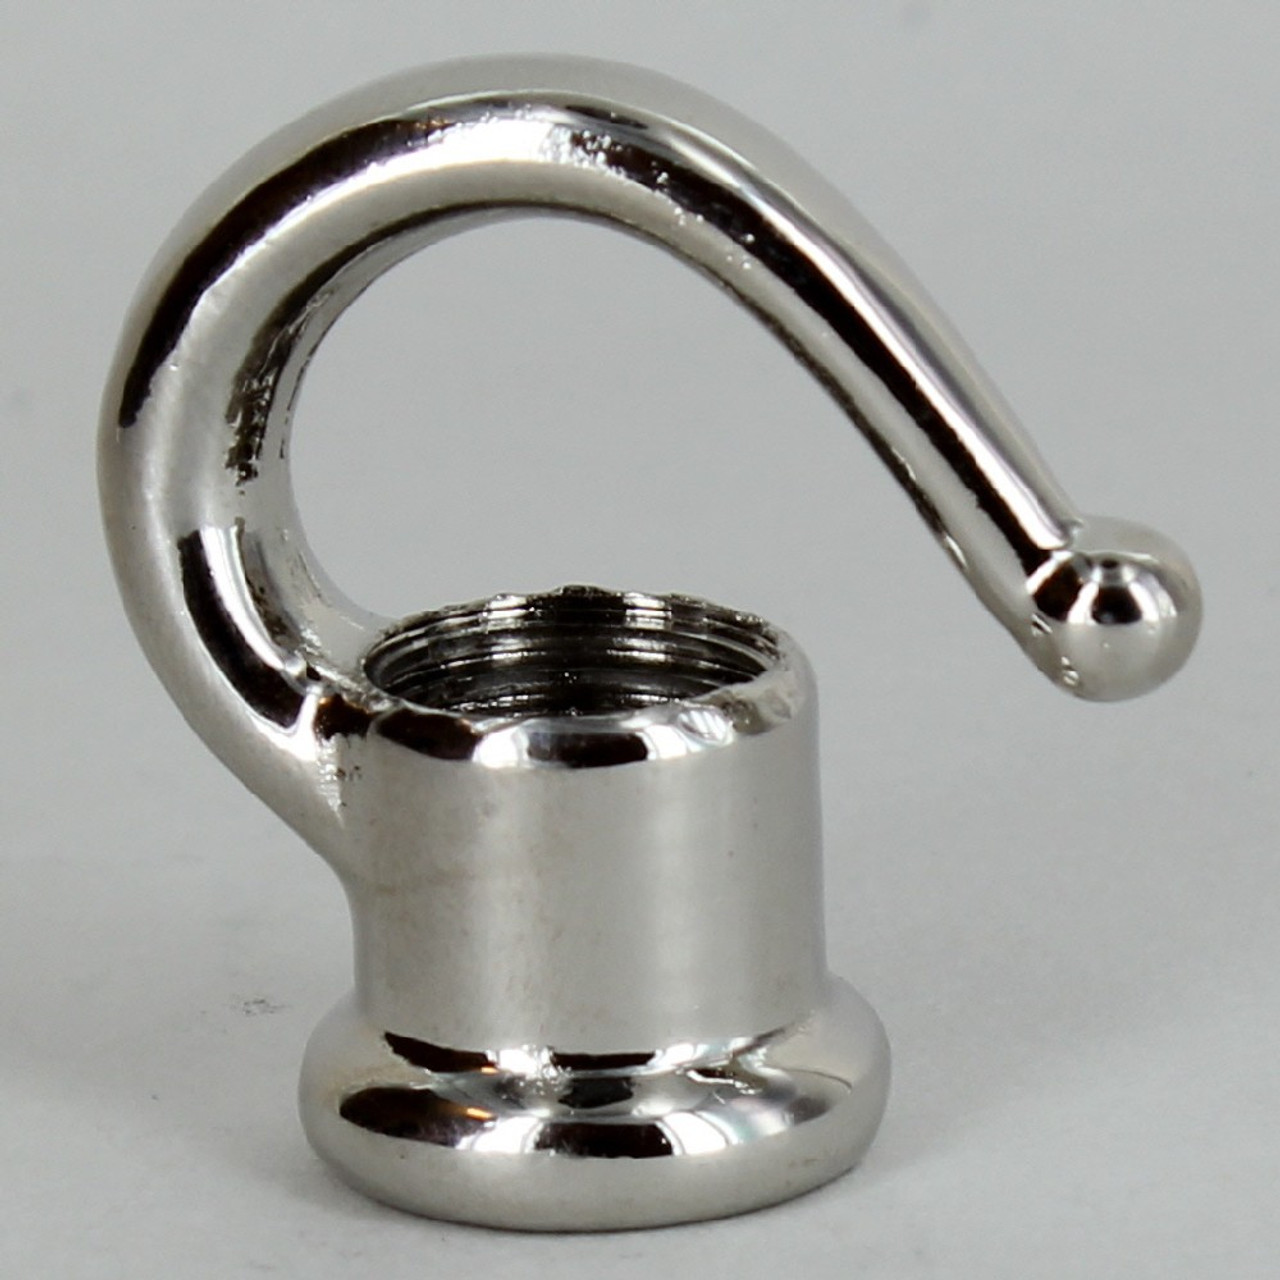 1/4ips. Female Threaded - Hook with Wire Way - Nickel Plated Finish